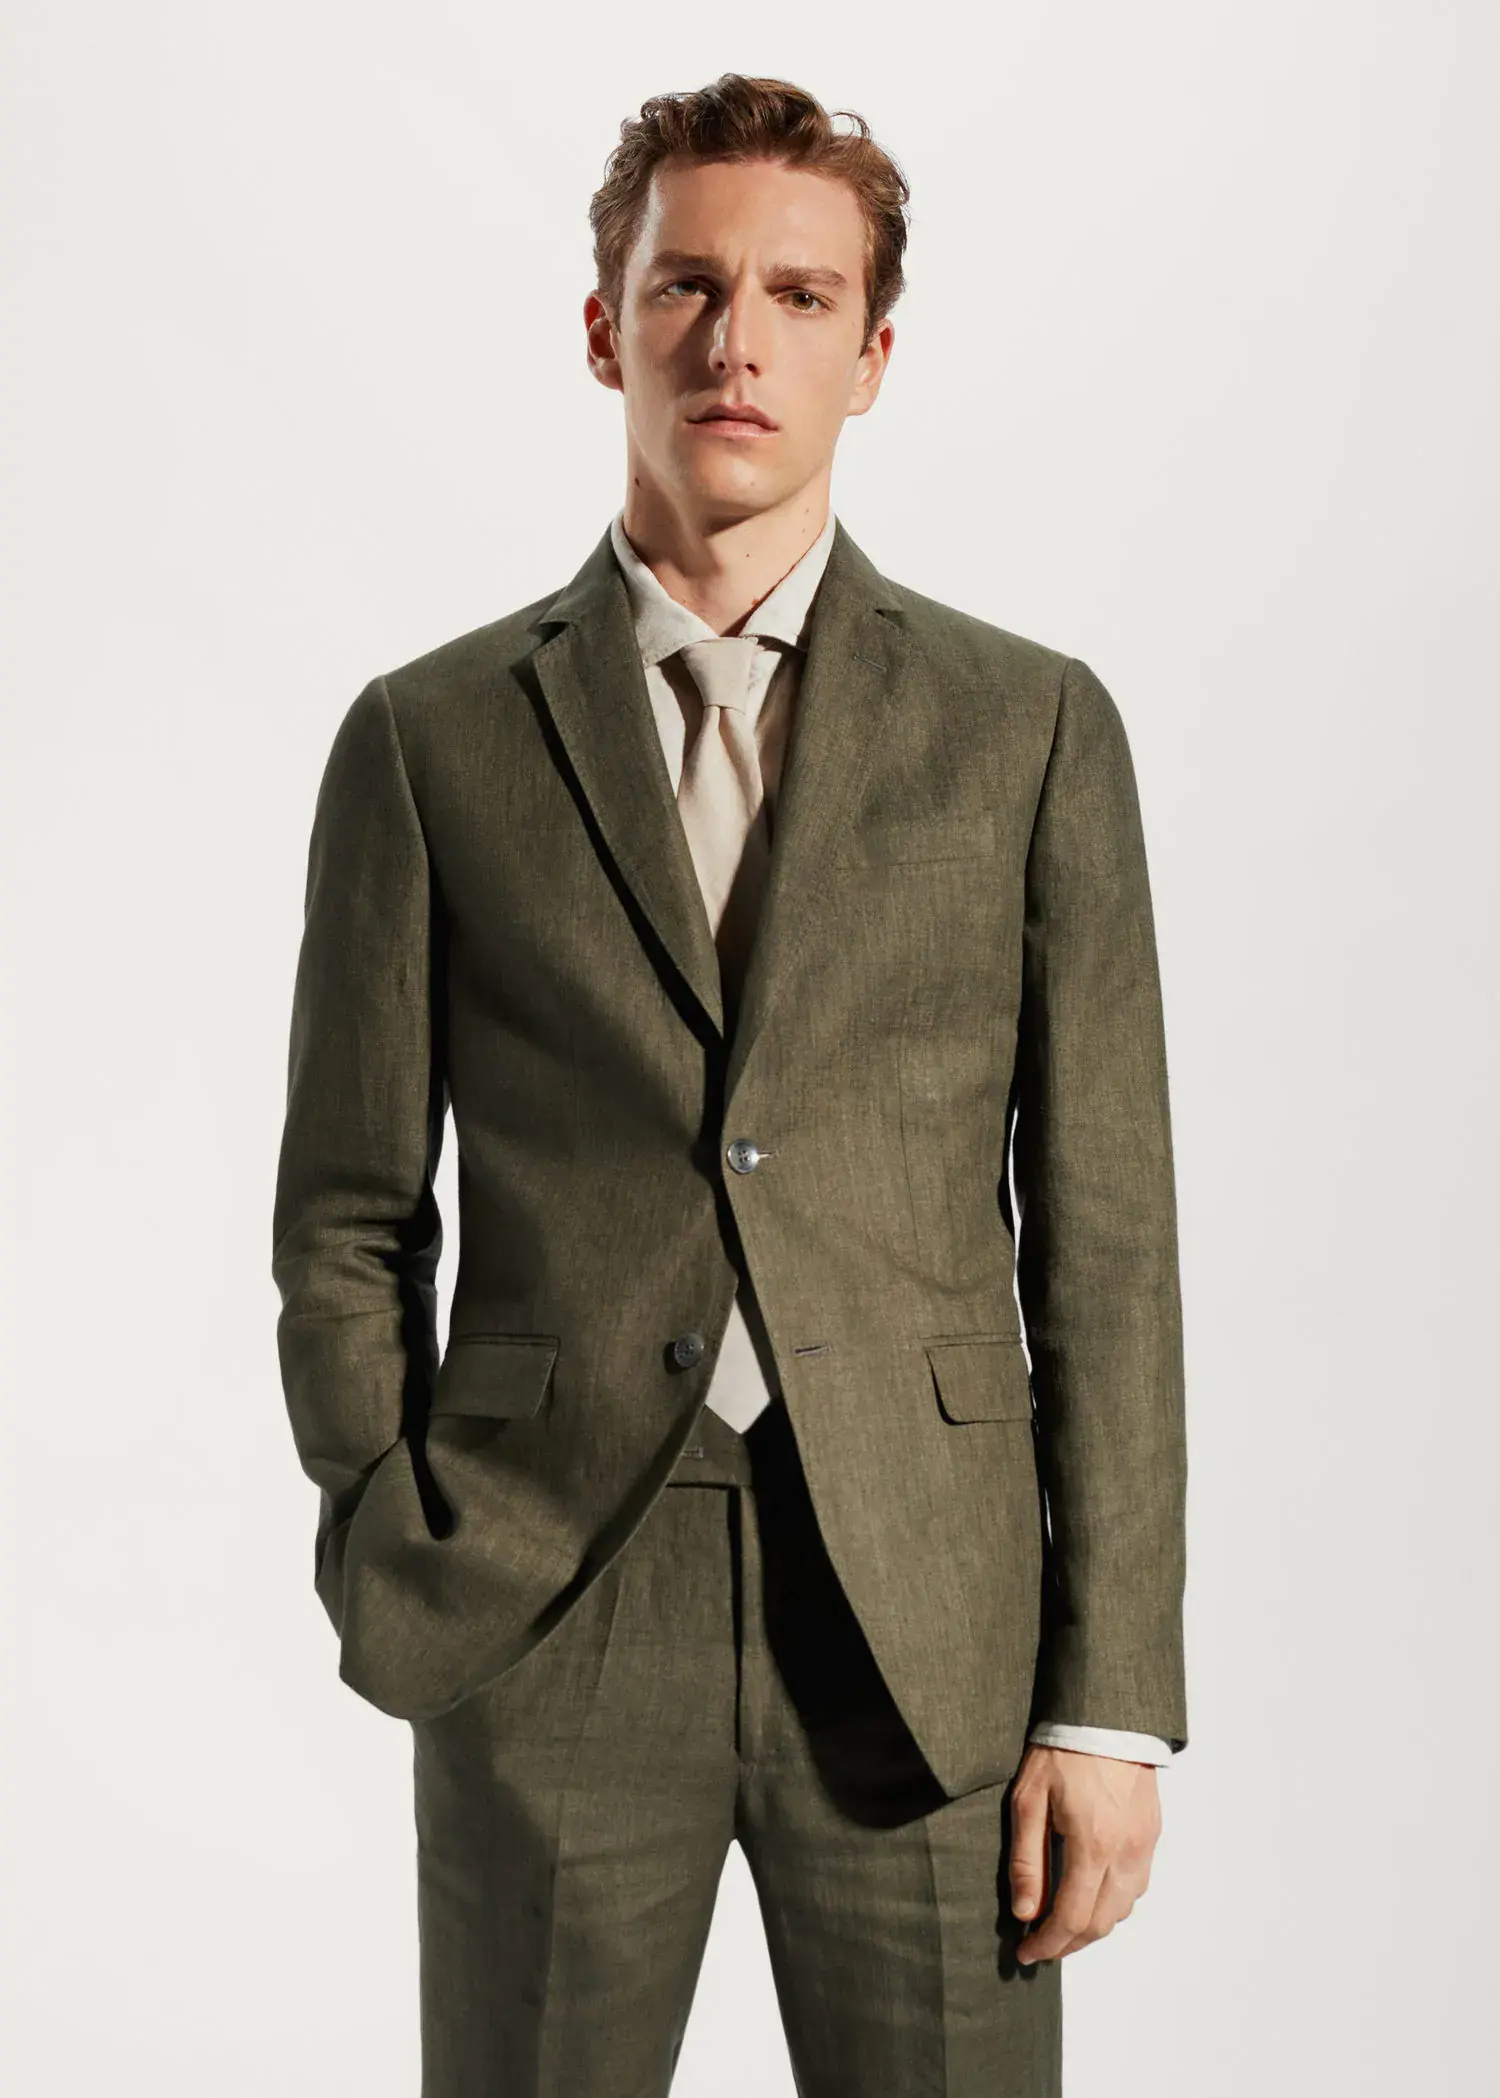 Mango Blazer suit 100% linen. a man in a suit and tie standing in front of a wall. 